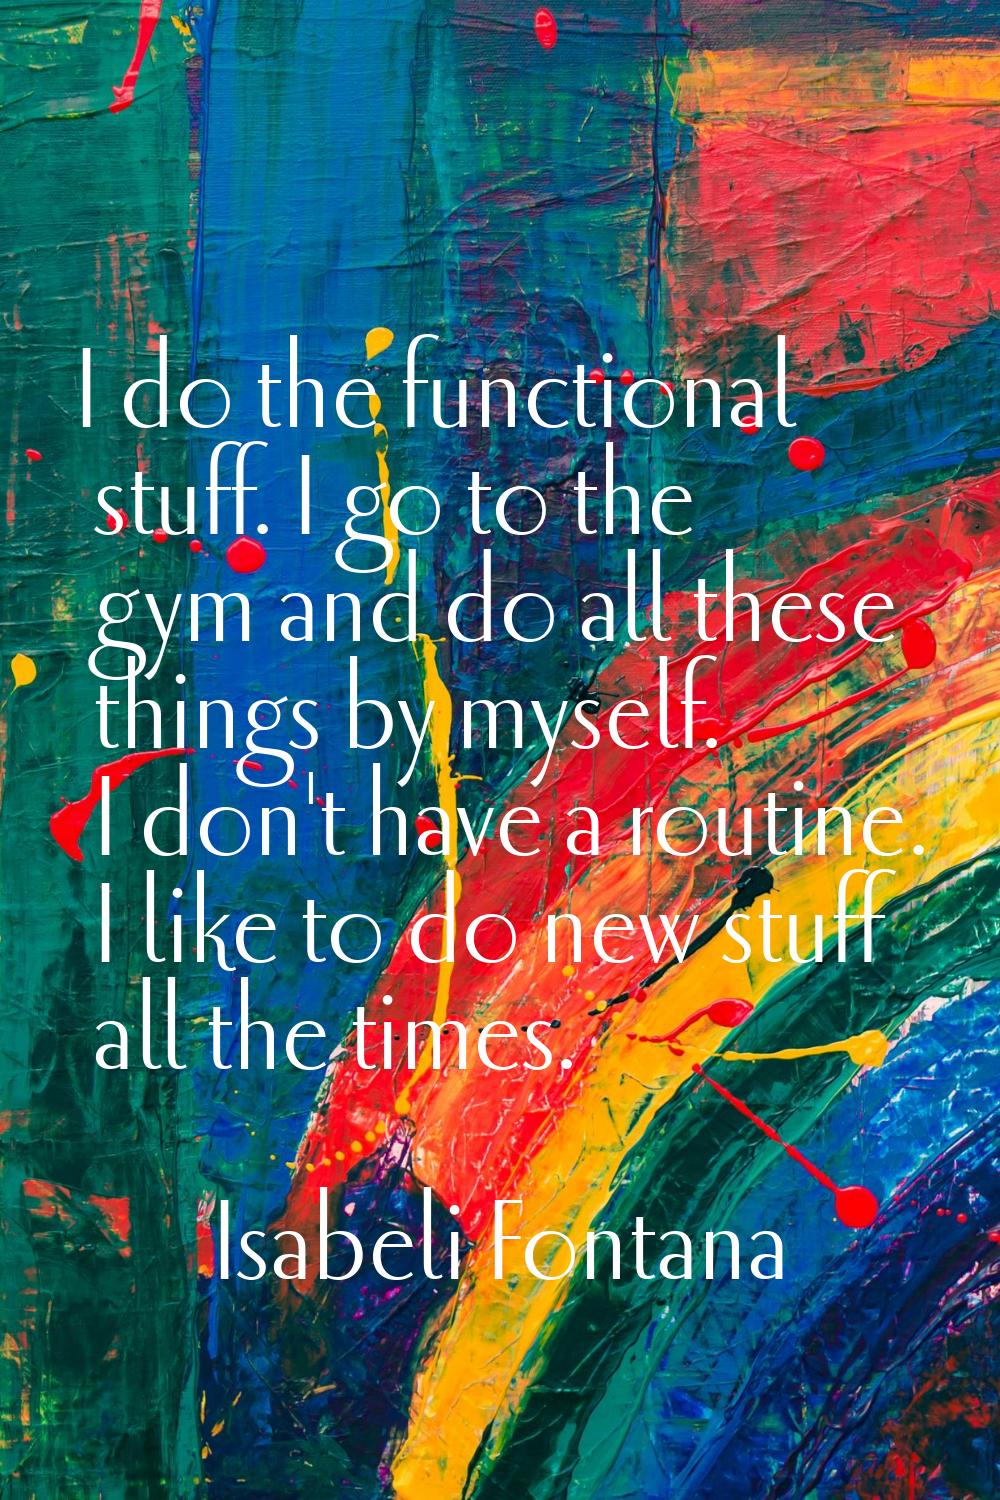 I do the functional stuff. I go to the gym and do all these things by myself. I don't have a routin